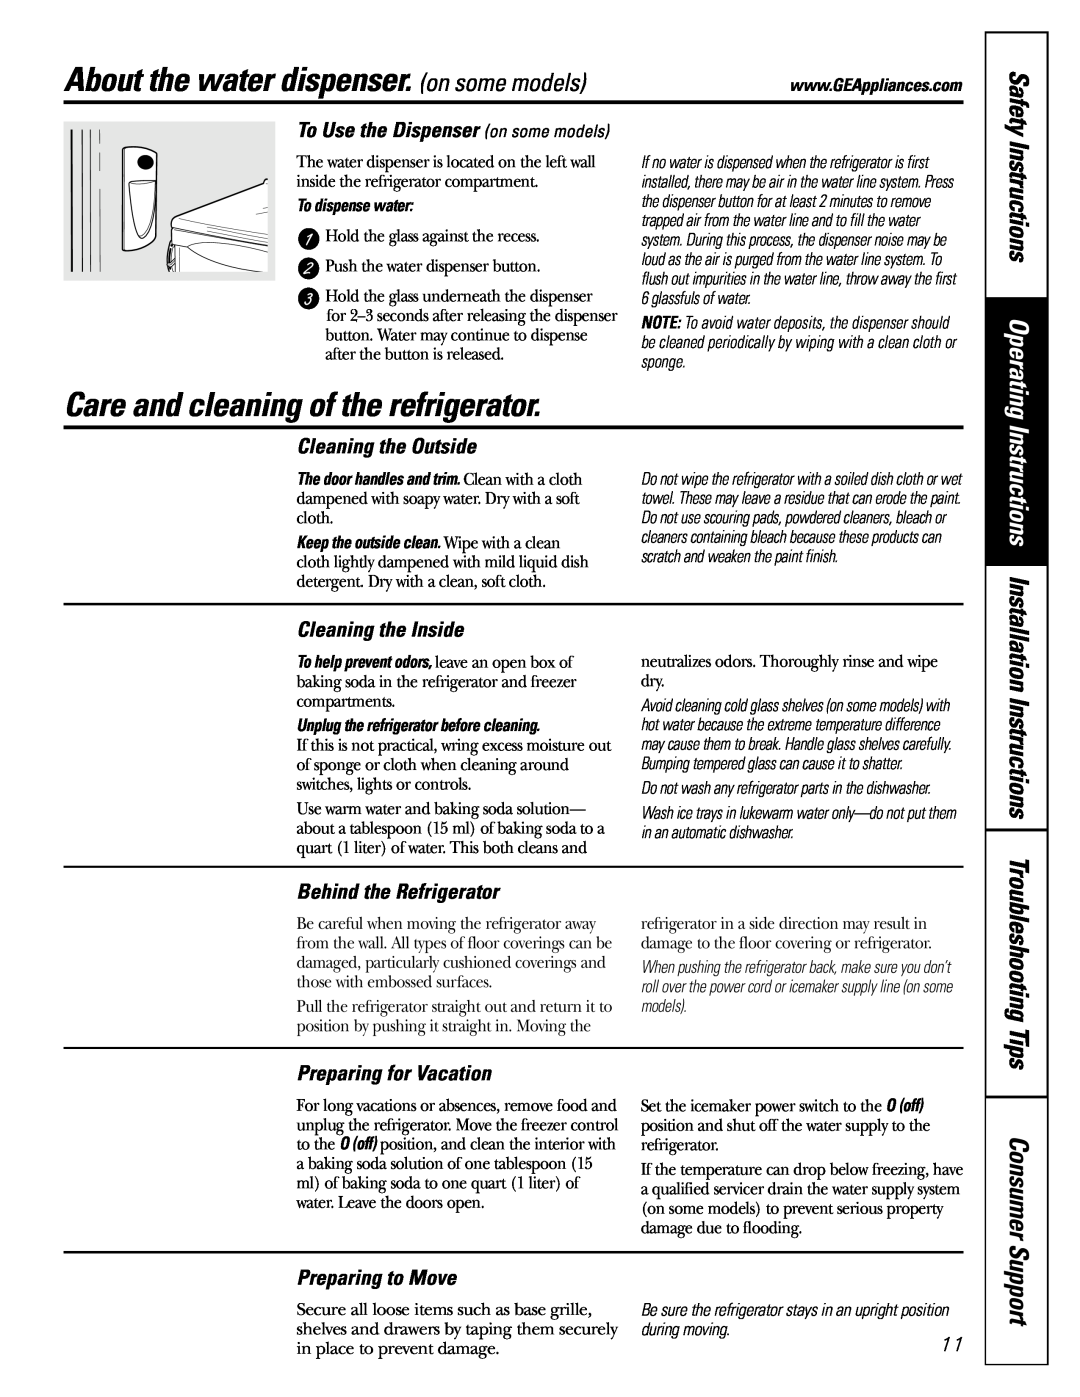 LG Electronics 25 About the water dispenser. on some models, Care and cleaning of the refrigerator, Instructions, Support 